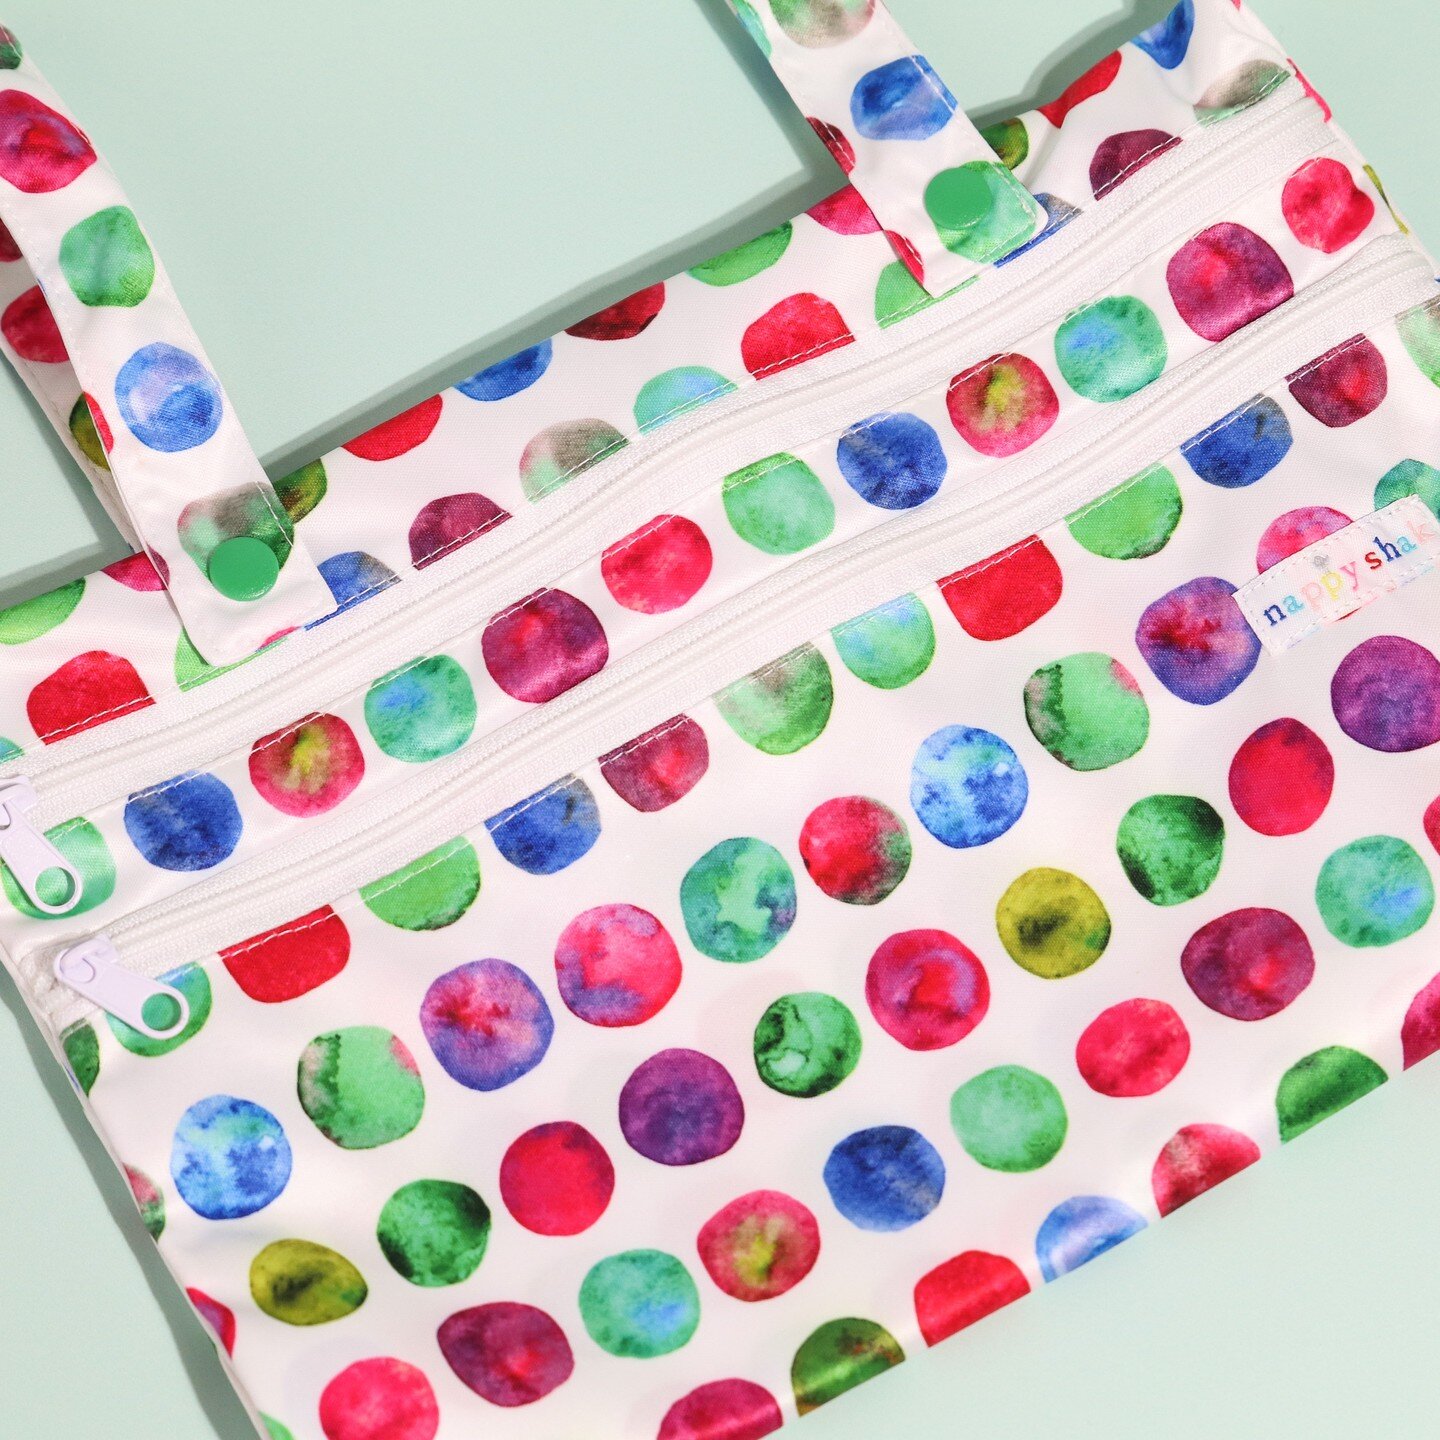 Our Waterproof Wet Bags are designed for storing your reusable cloth nappies, with two compartments for separating clean and soiled nappies.

The two snap hooks make them ideal for hanging up at home or on your buggy / stroller when you&rsquo;re out 